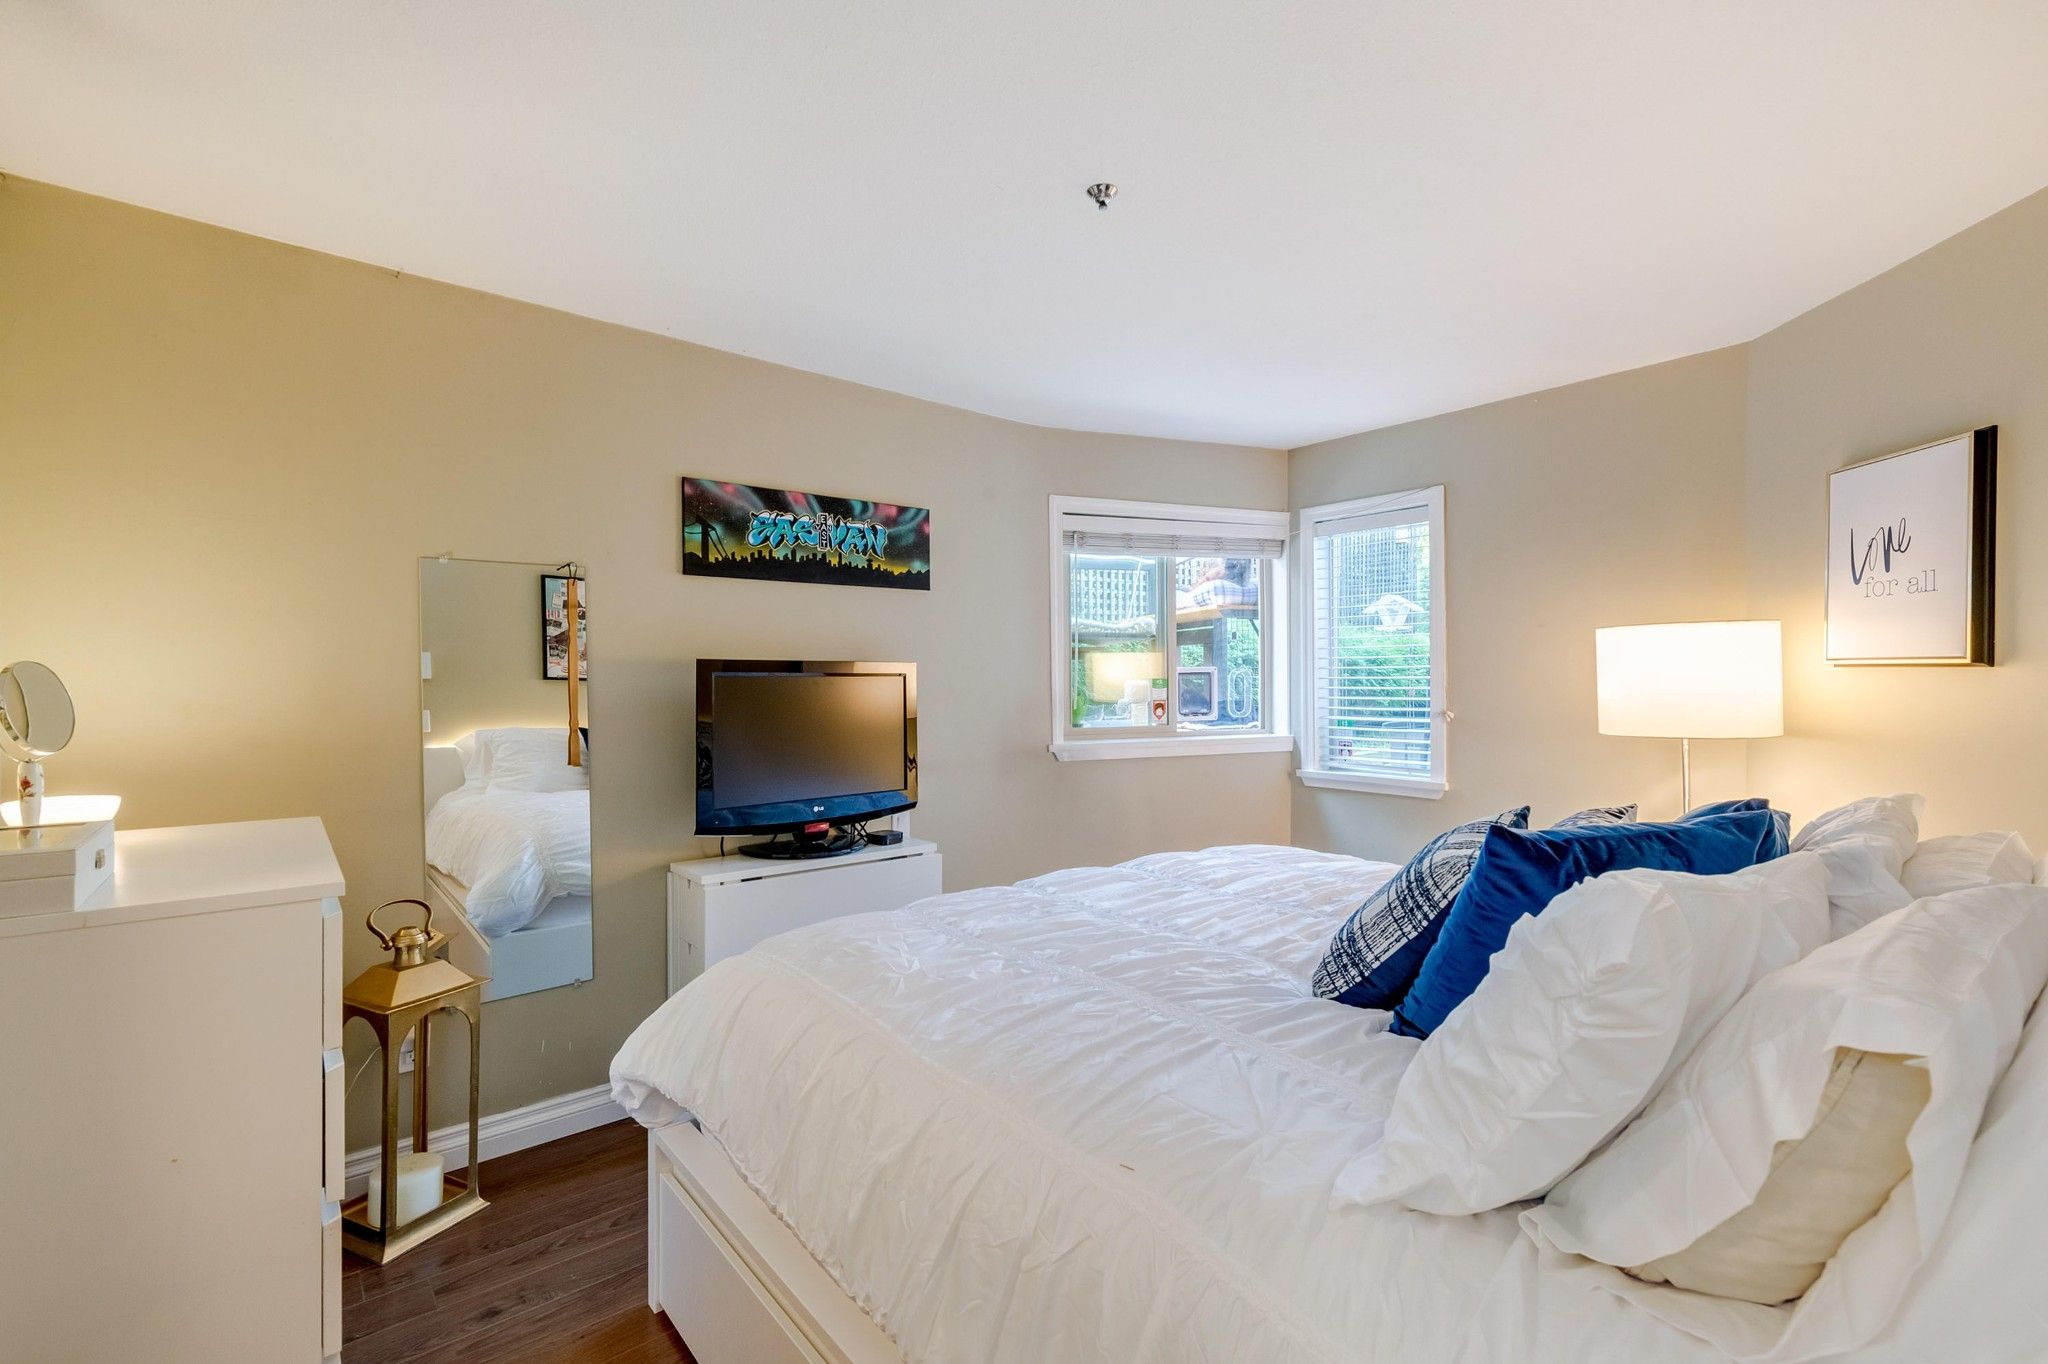 Photo 18: Photos: 103 2709 Victoria Drive in Vancouver: Grandview Woodland Condo for sale (Vancouver East)  : MLS®# R2504262